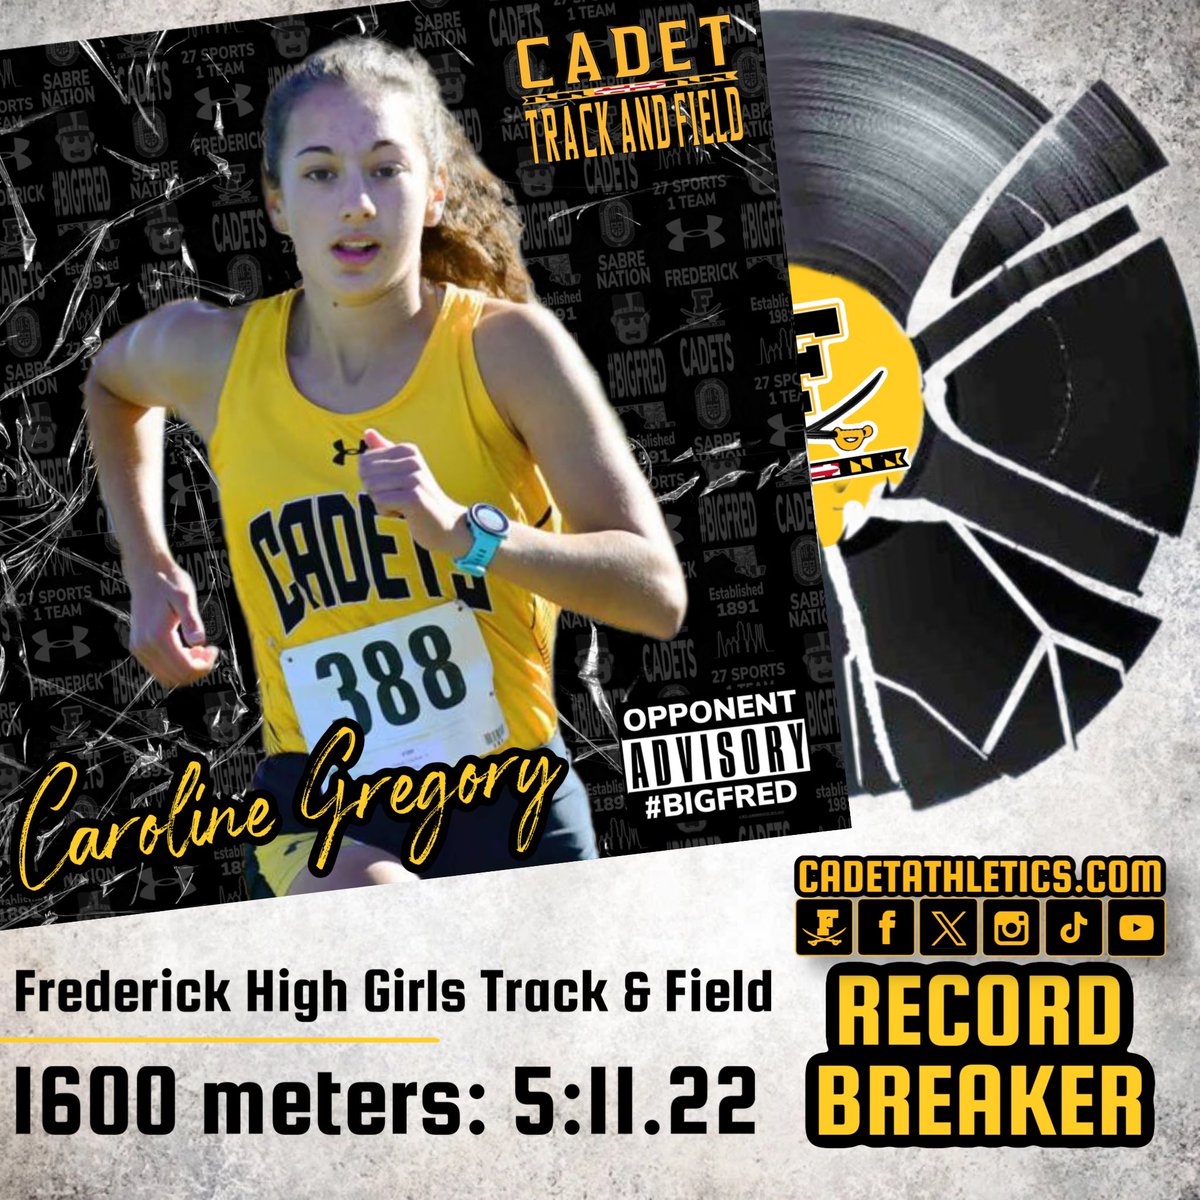 💿Cadetathletics.com Record Breaker💿

Cadet senior Caroline Gregory has set a new Frederick High School Girls 1600m record with a time of 5:11.22 today at the Gator Invitational eclipsing the mark set by Jennie Novak in 1990.

⚔️ | #BigFred | ⬛️🟨 |#ProtectTheParkway